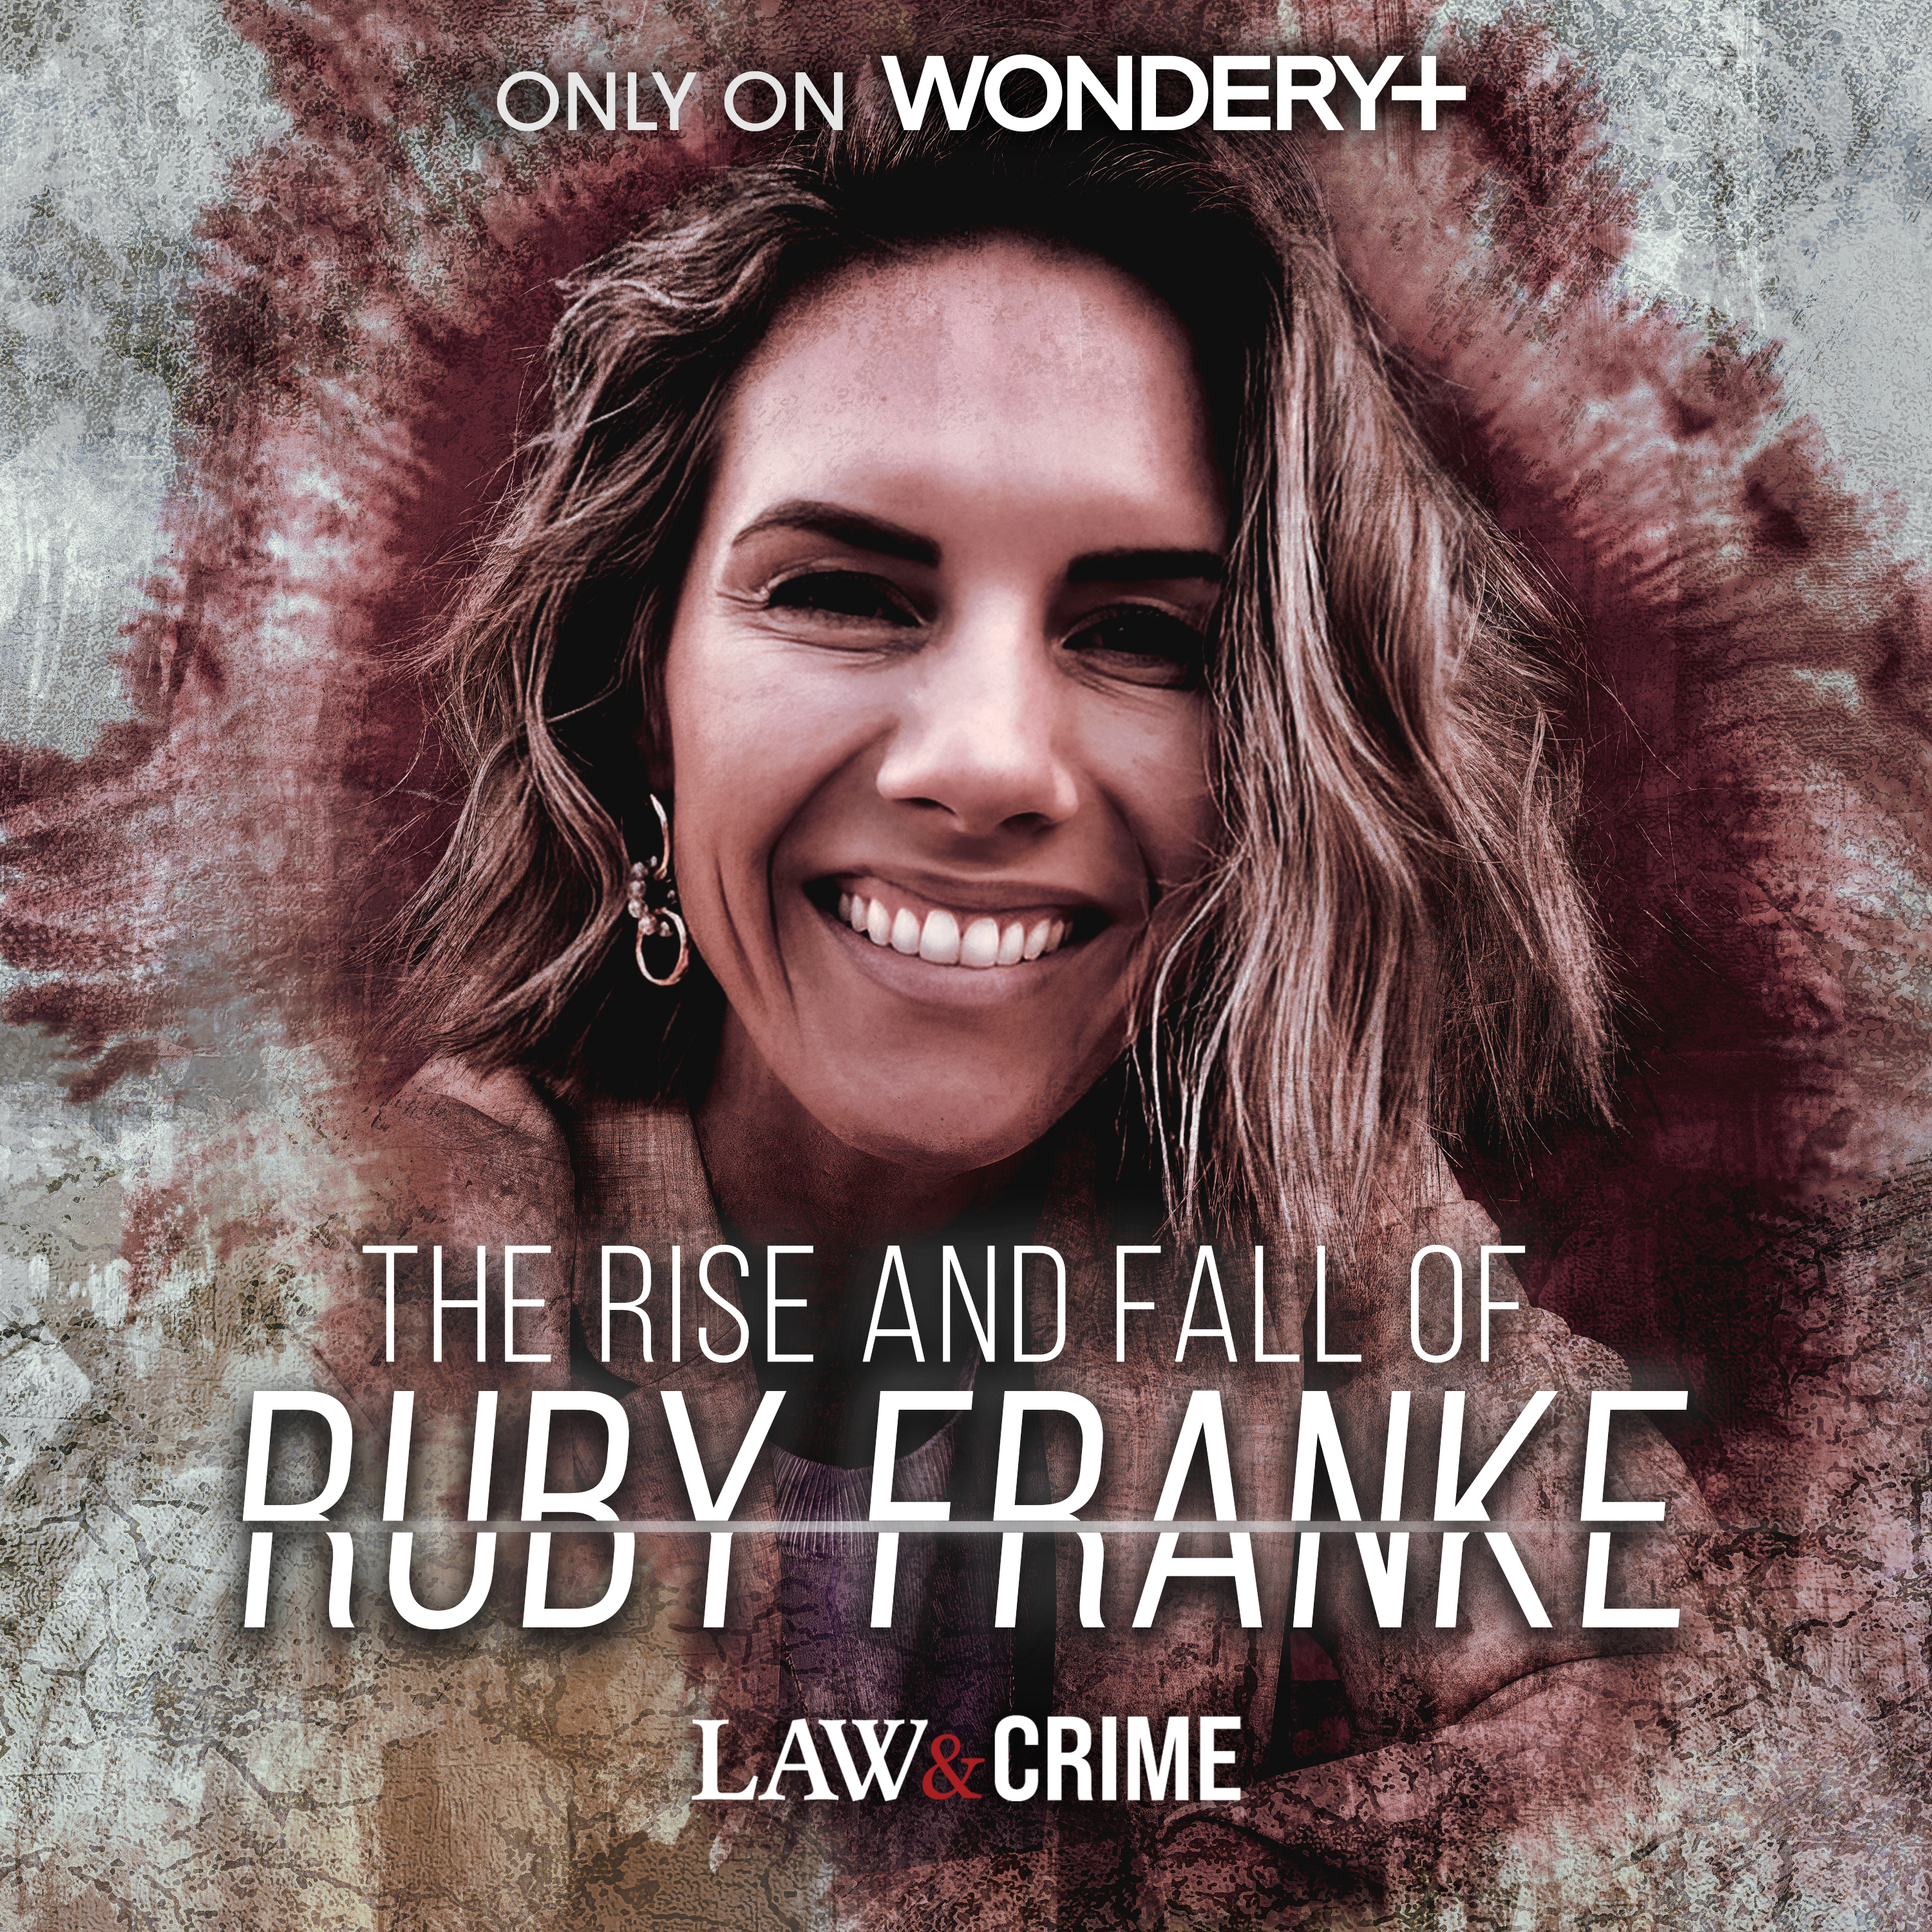 Introducing: The Rise and Fall of Ruby Franke by Law&Crime | Wondery